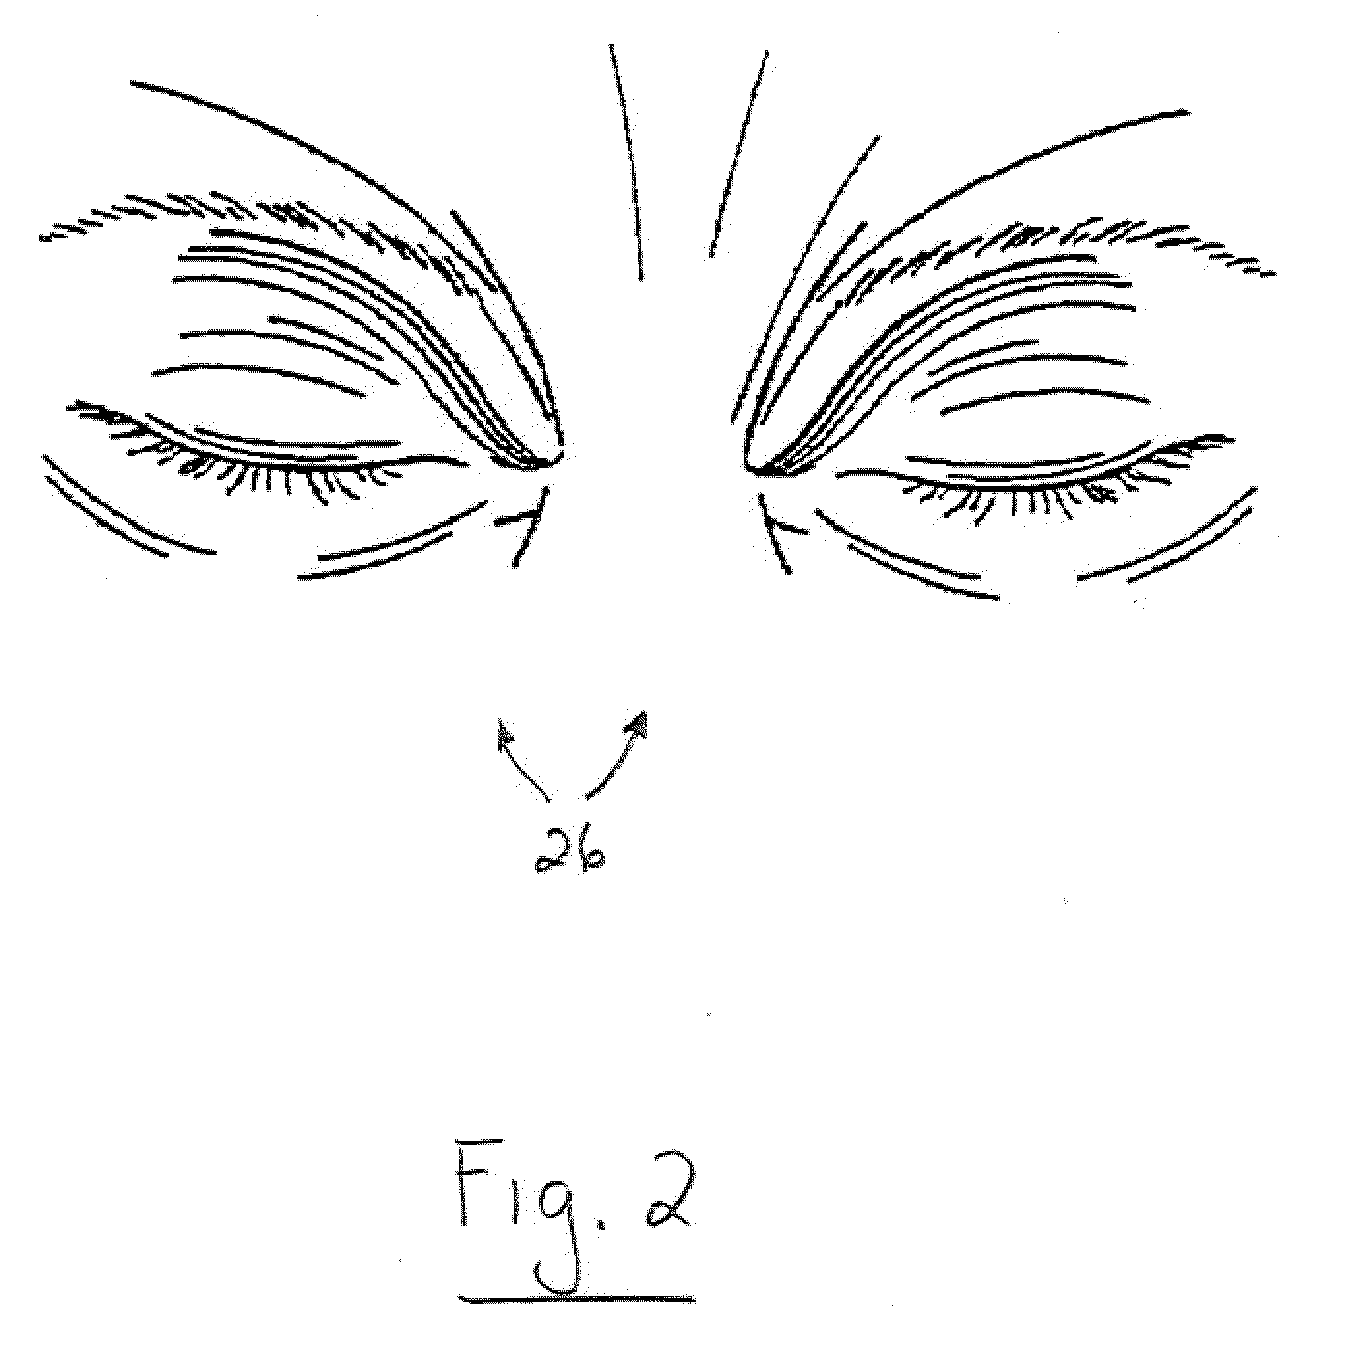 Apparatus and method for treating a neuromuscular defect